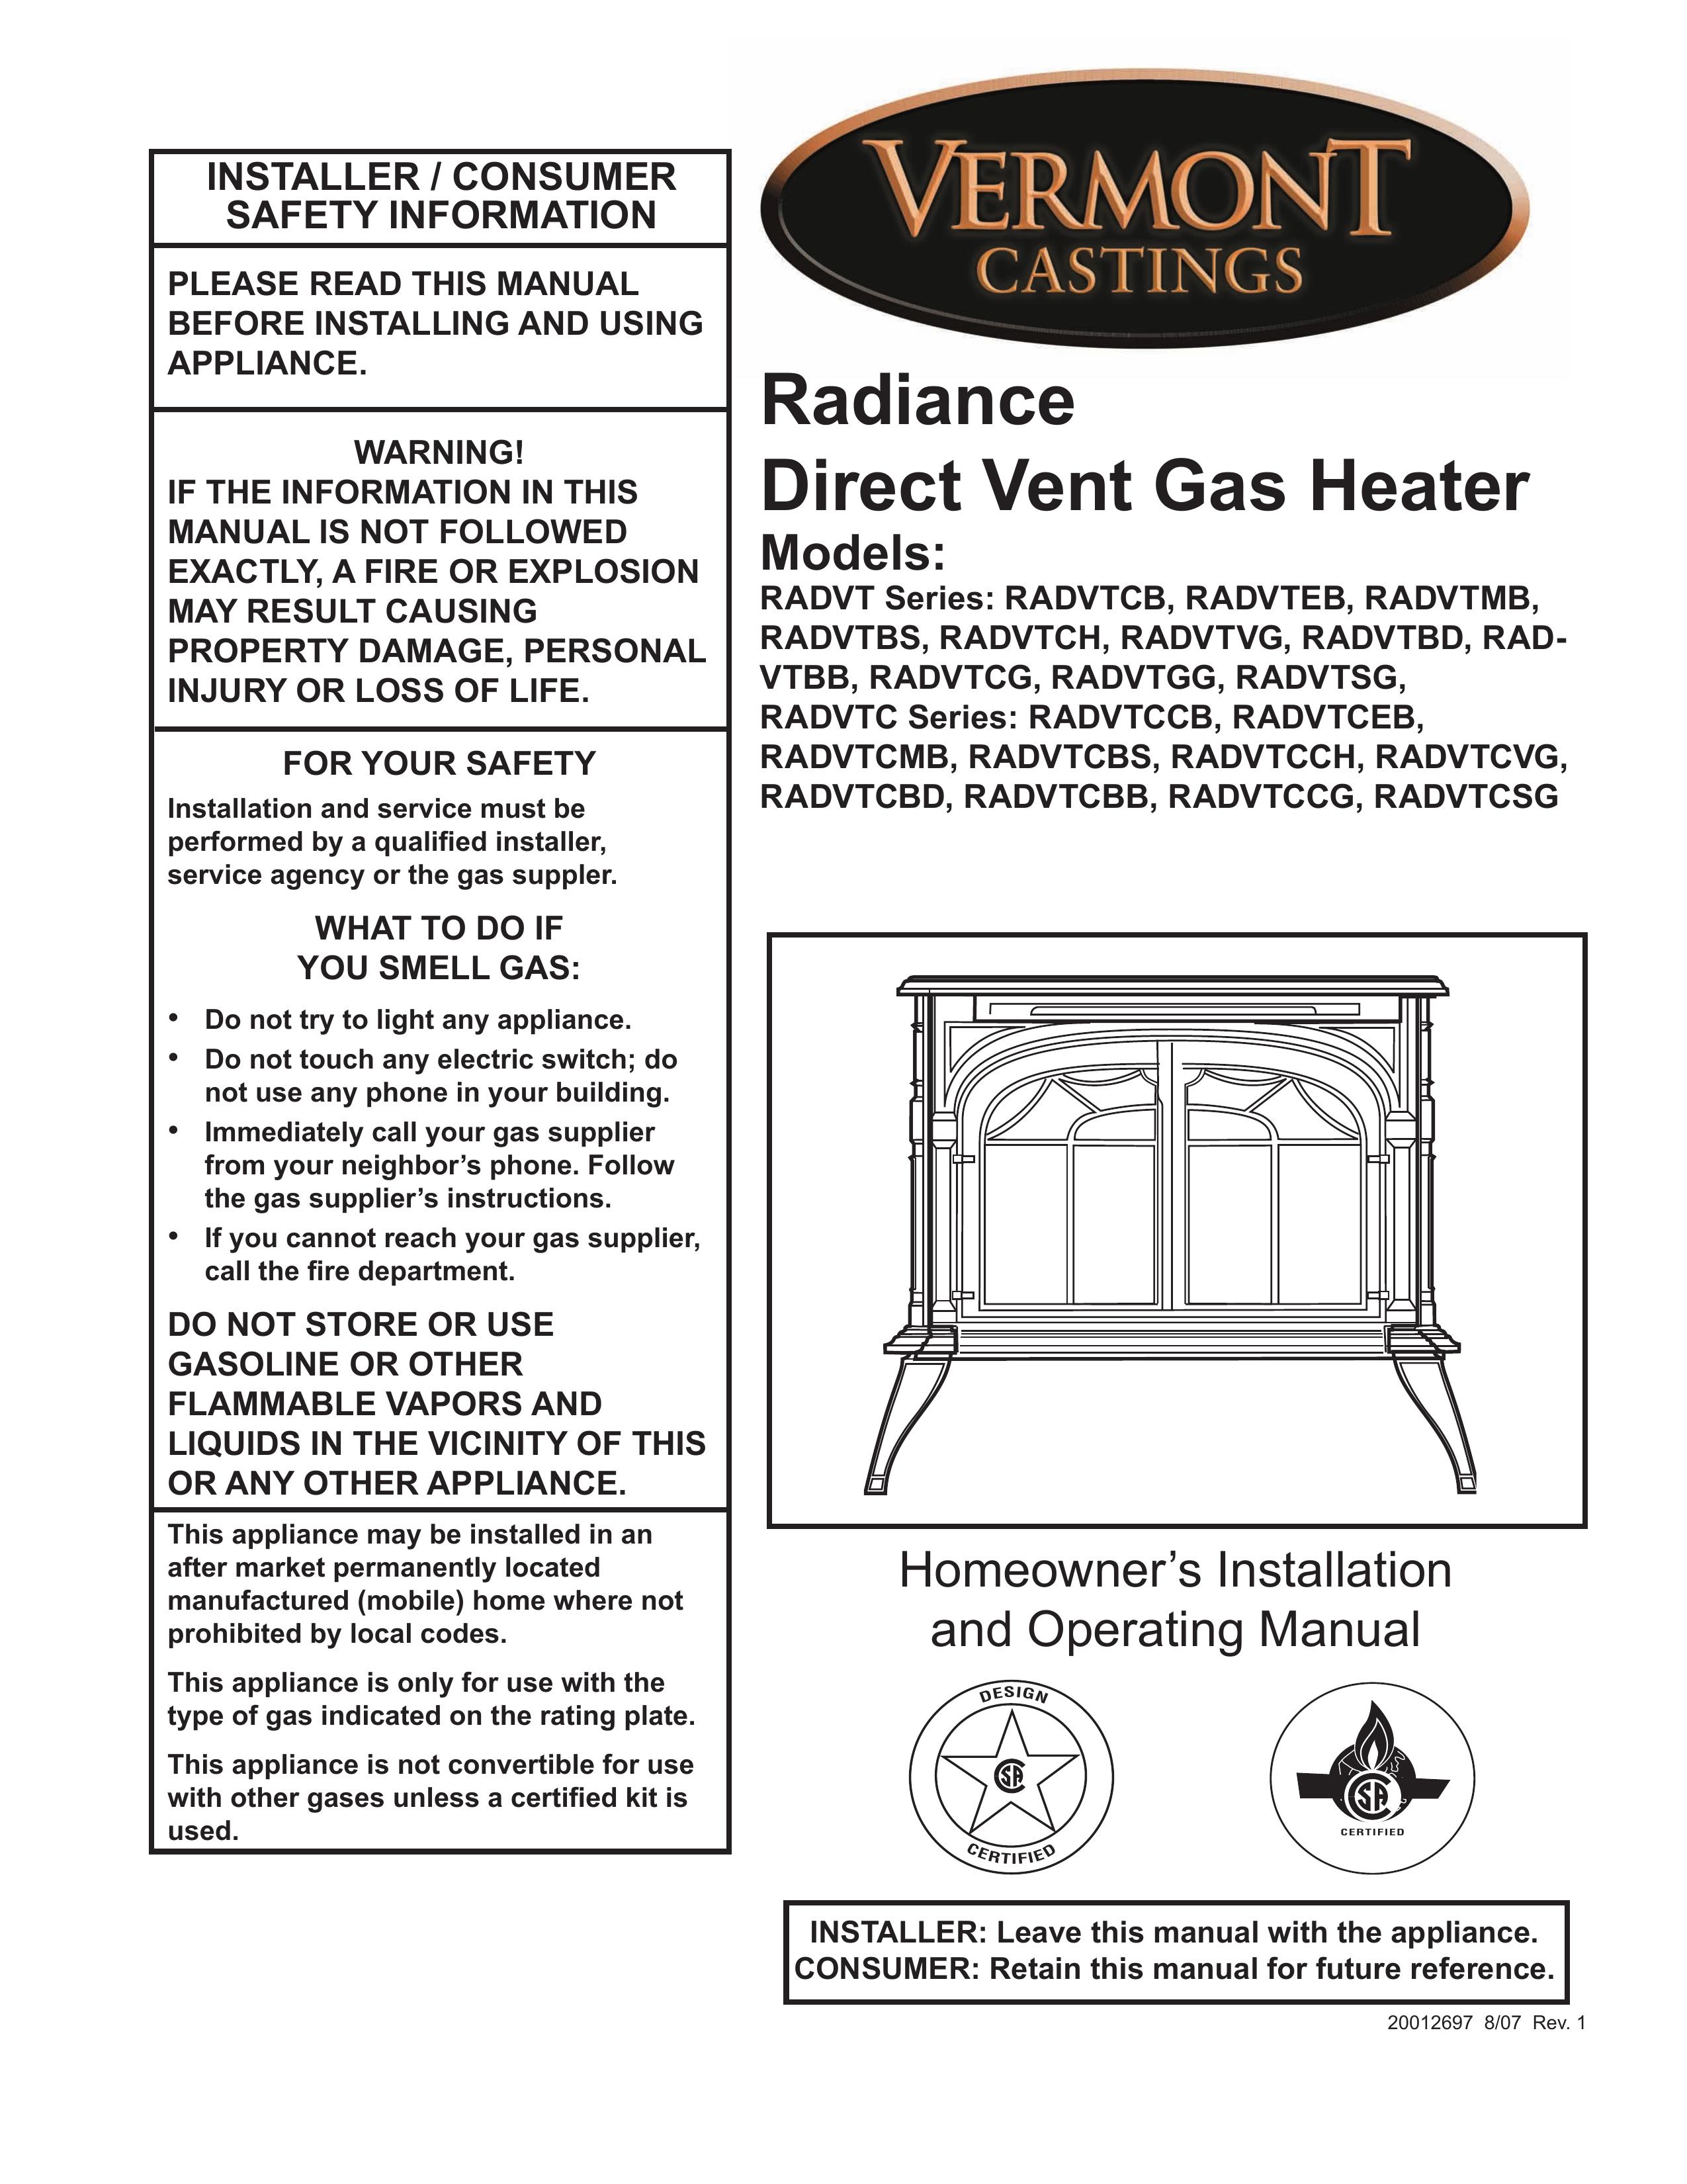 Vermont Casting RADVTCEB Outdoor Fireplace User Manual